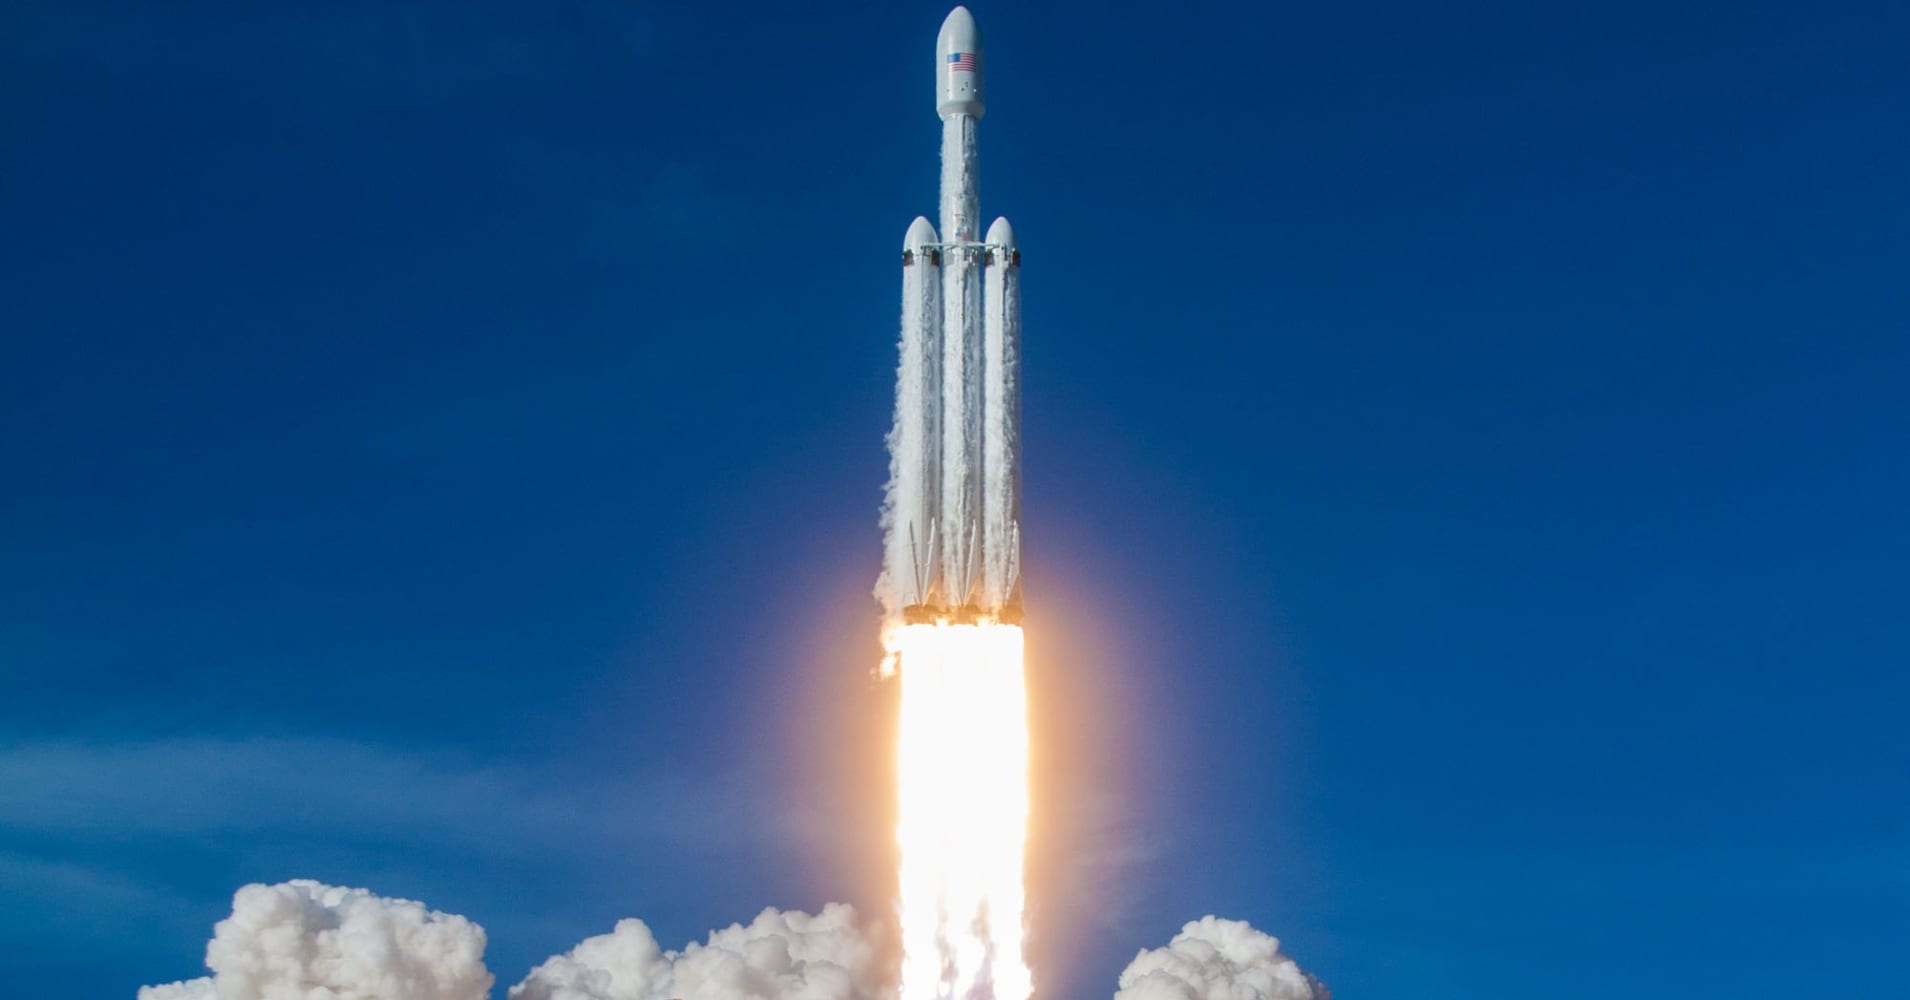 Livestream: Watch SpaceX Falcon Heavy rocket launch and ...